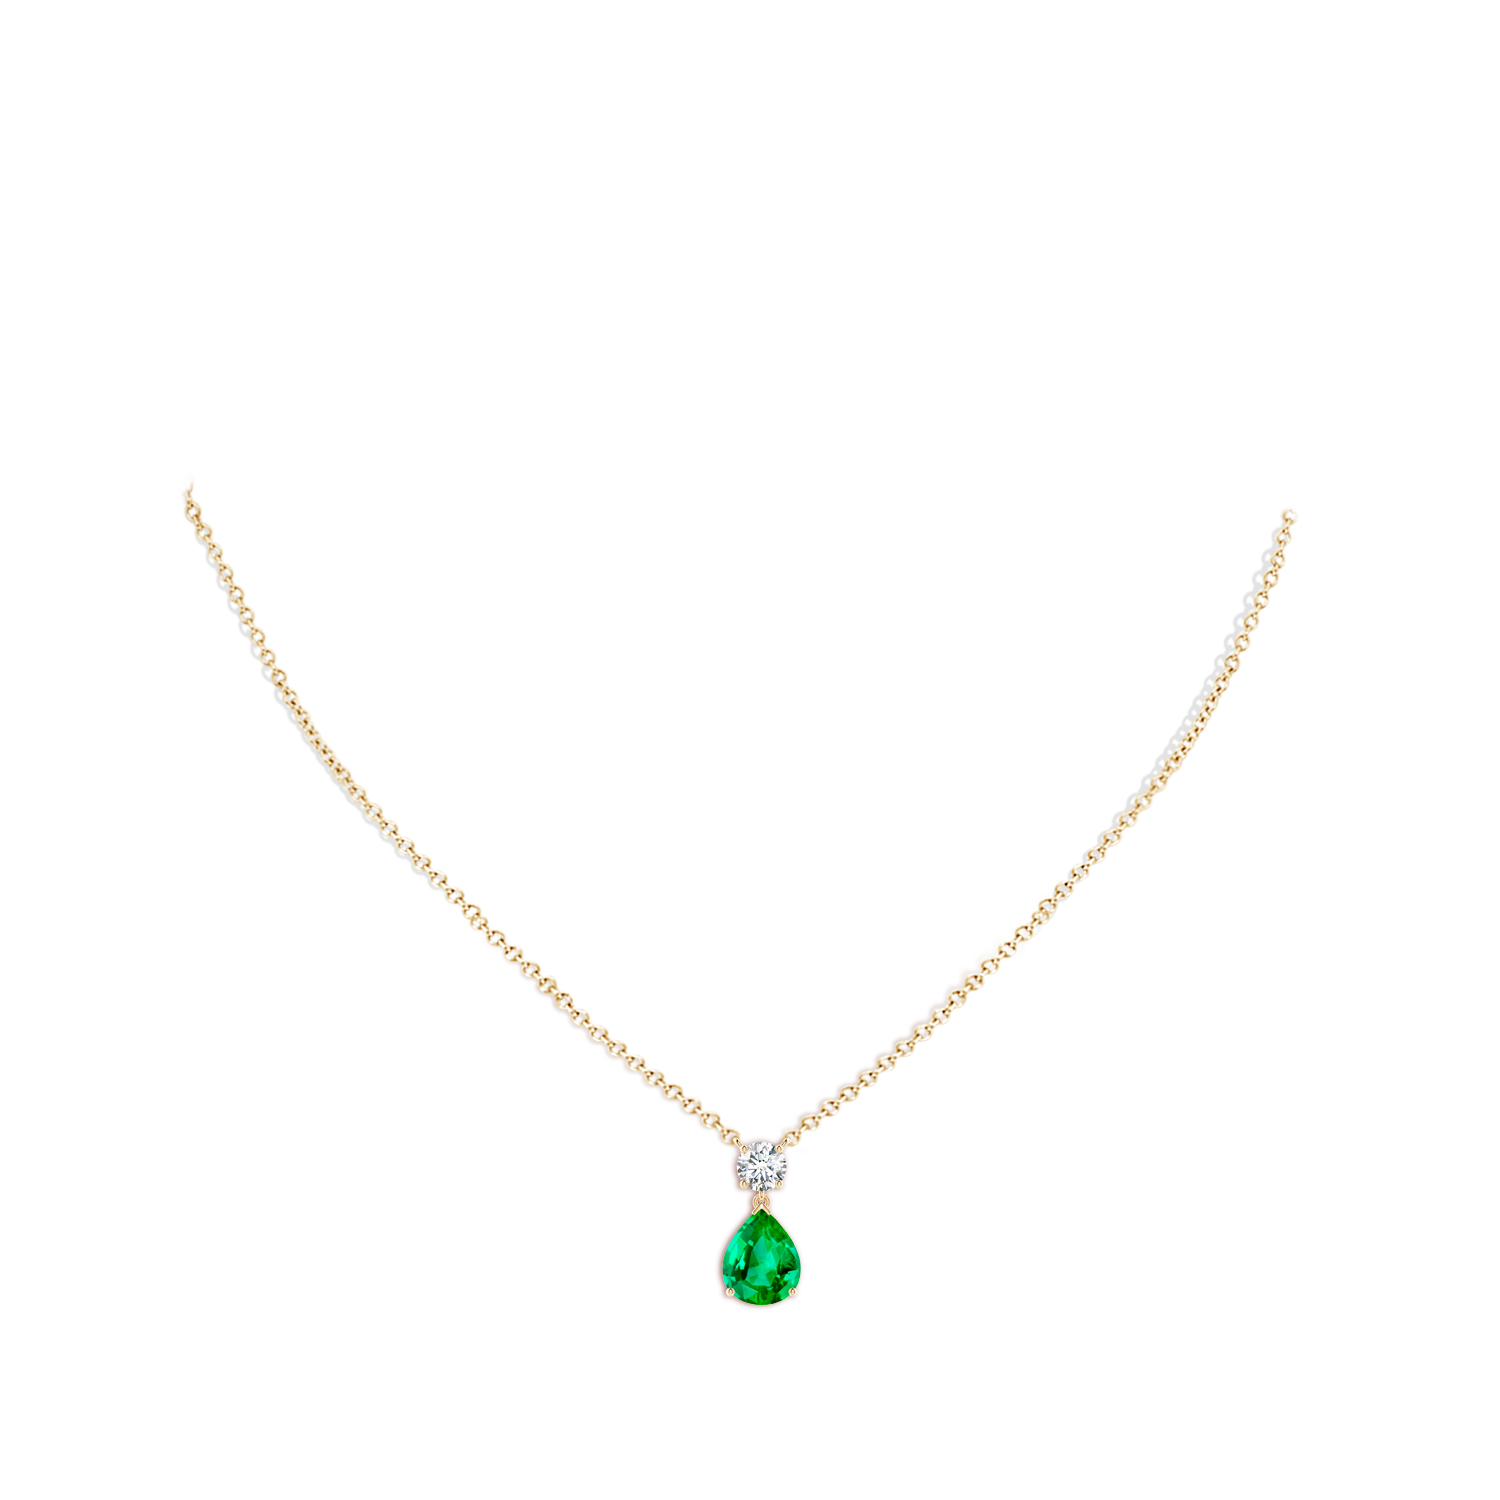 AAA - Emerald / 3 CT / 18 KT Yellow Gold